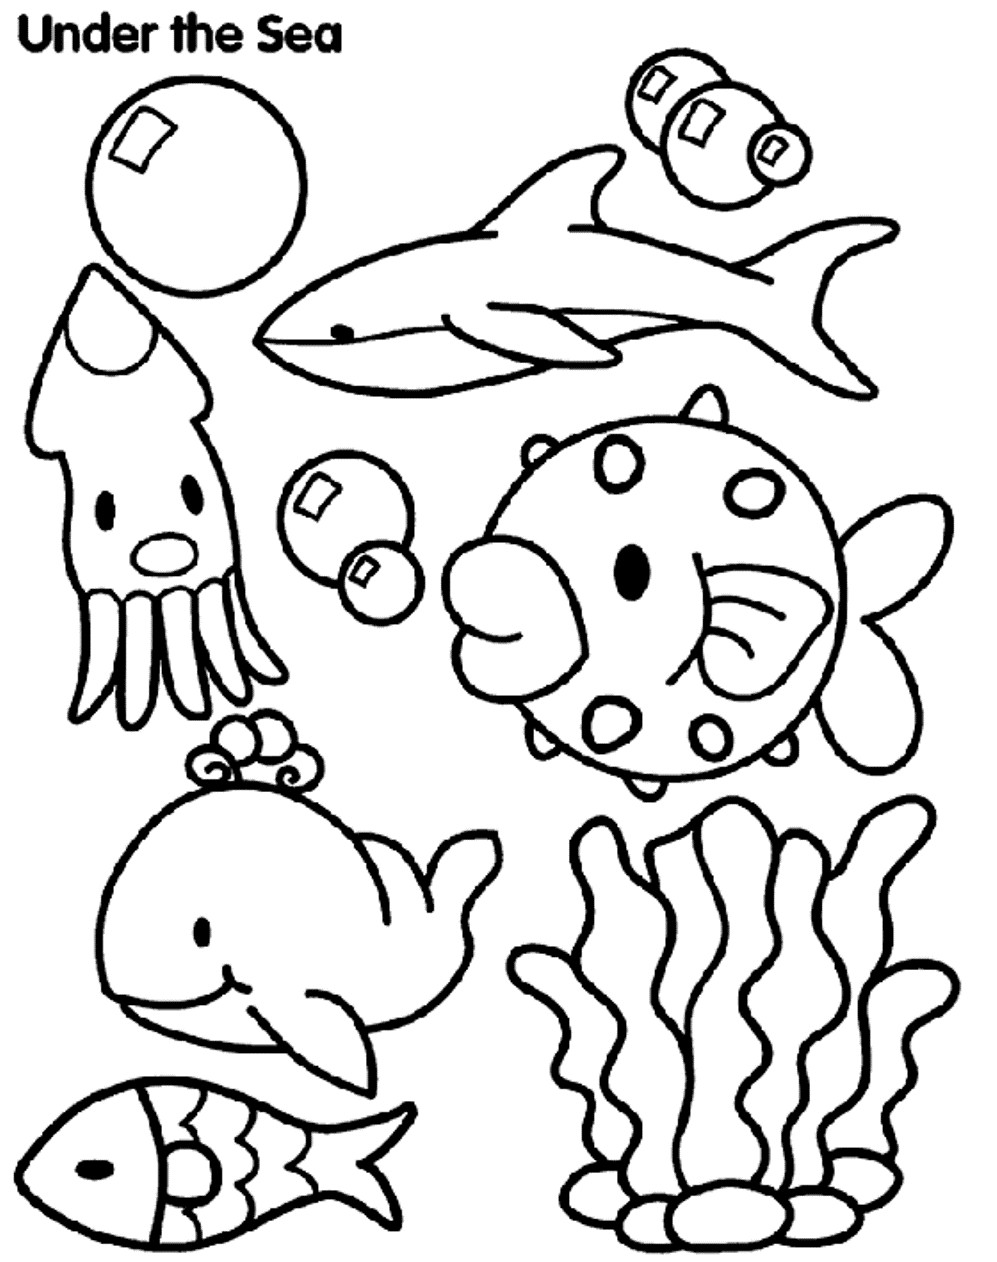 Ocean Coloring Book
 Under The Sea Coloring Pages If You Live Near The Ocean